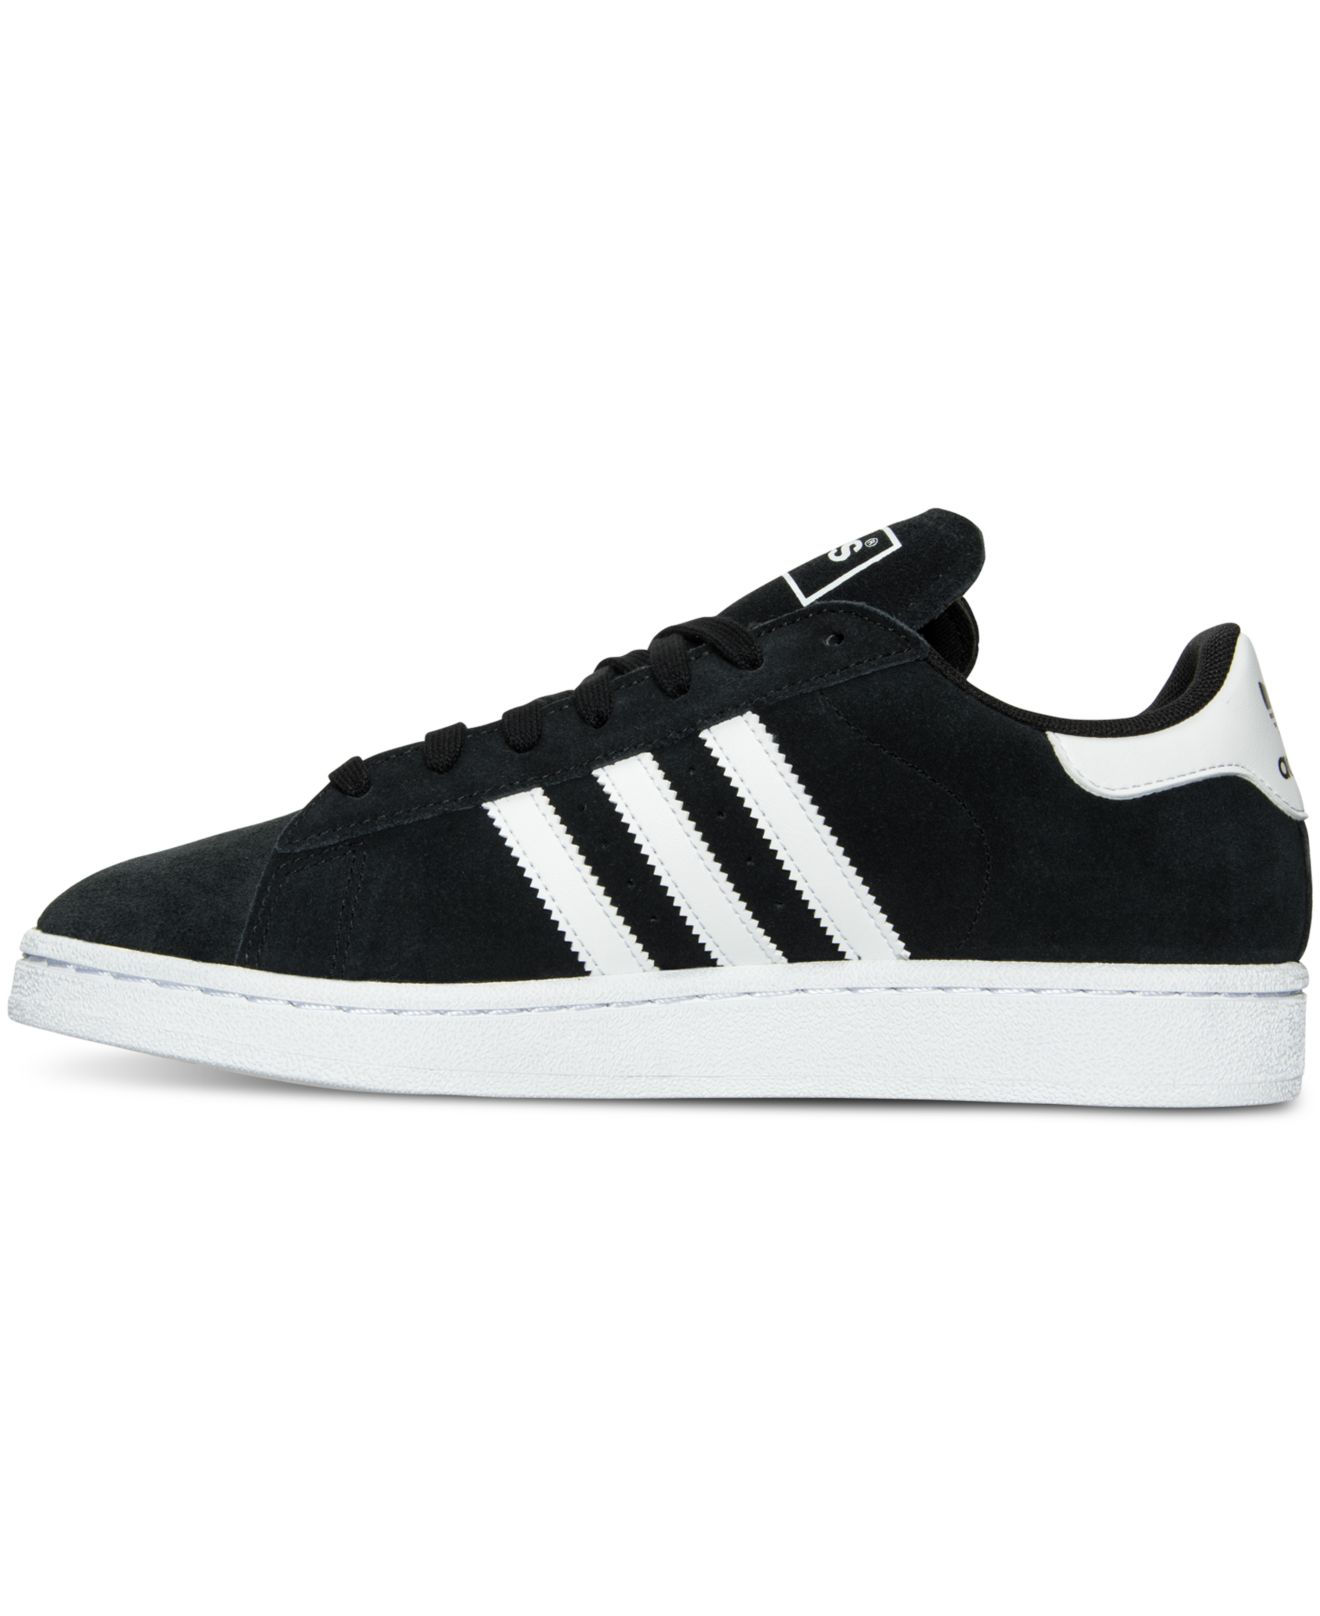 Lyst - Adidas Originals Men's Campus Suede Casual Sneakers From Finish ...